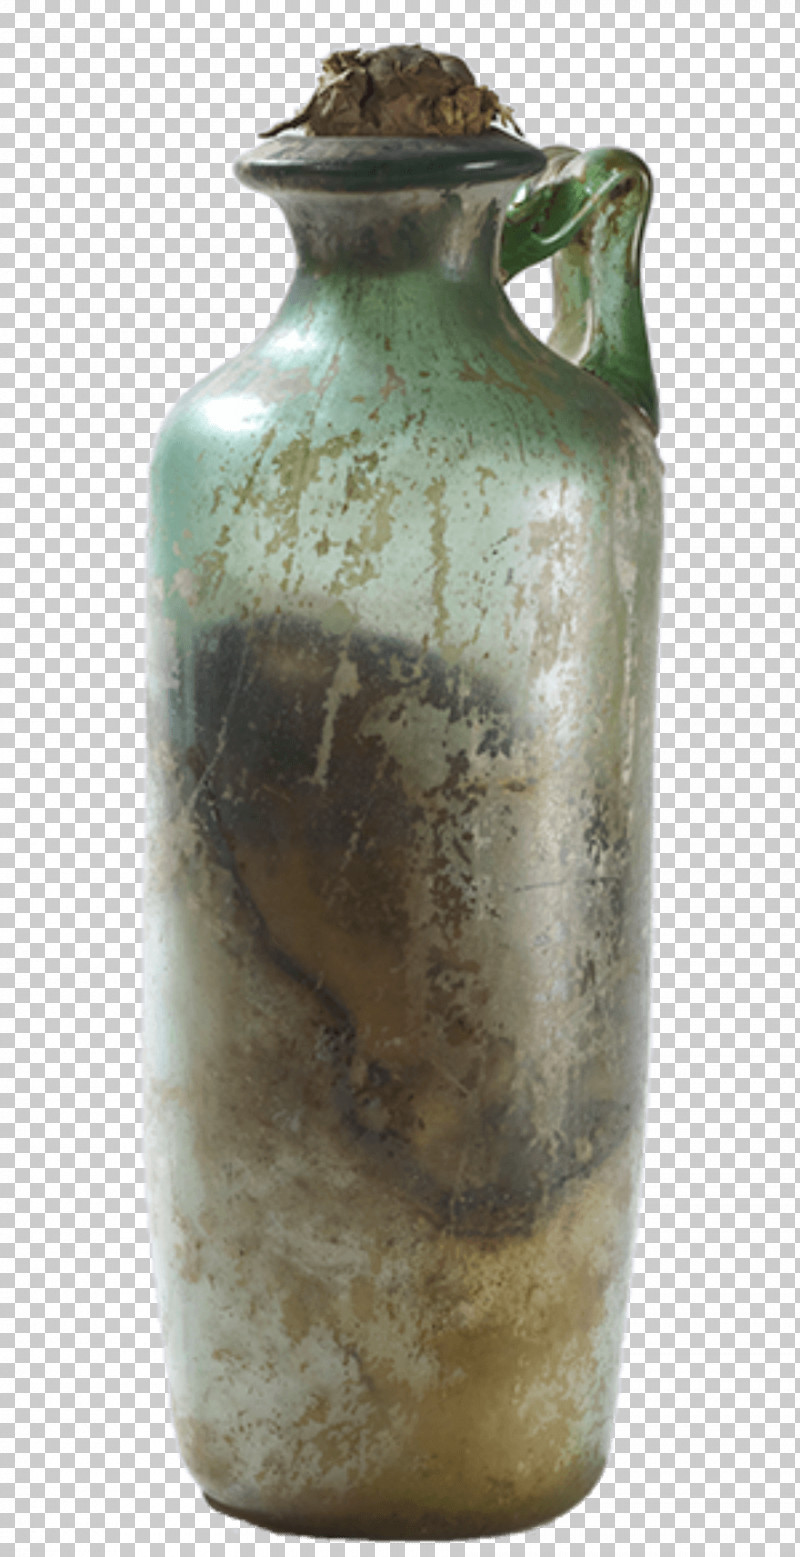 Vase Artifact Bottle Earthenware Pottery PNG, Clipart, Antique, Artifact, Bottle, Ceramic, Earthenware Free PNG Download